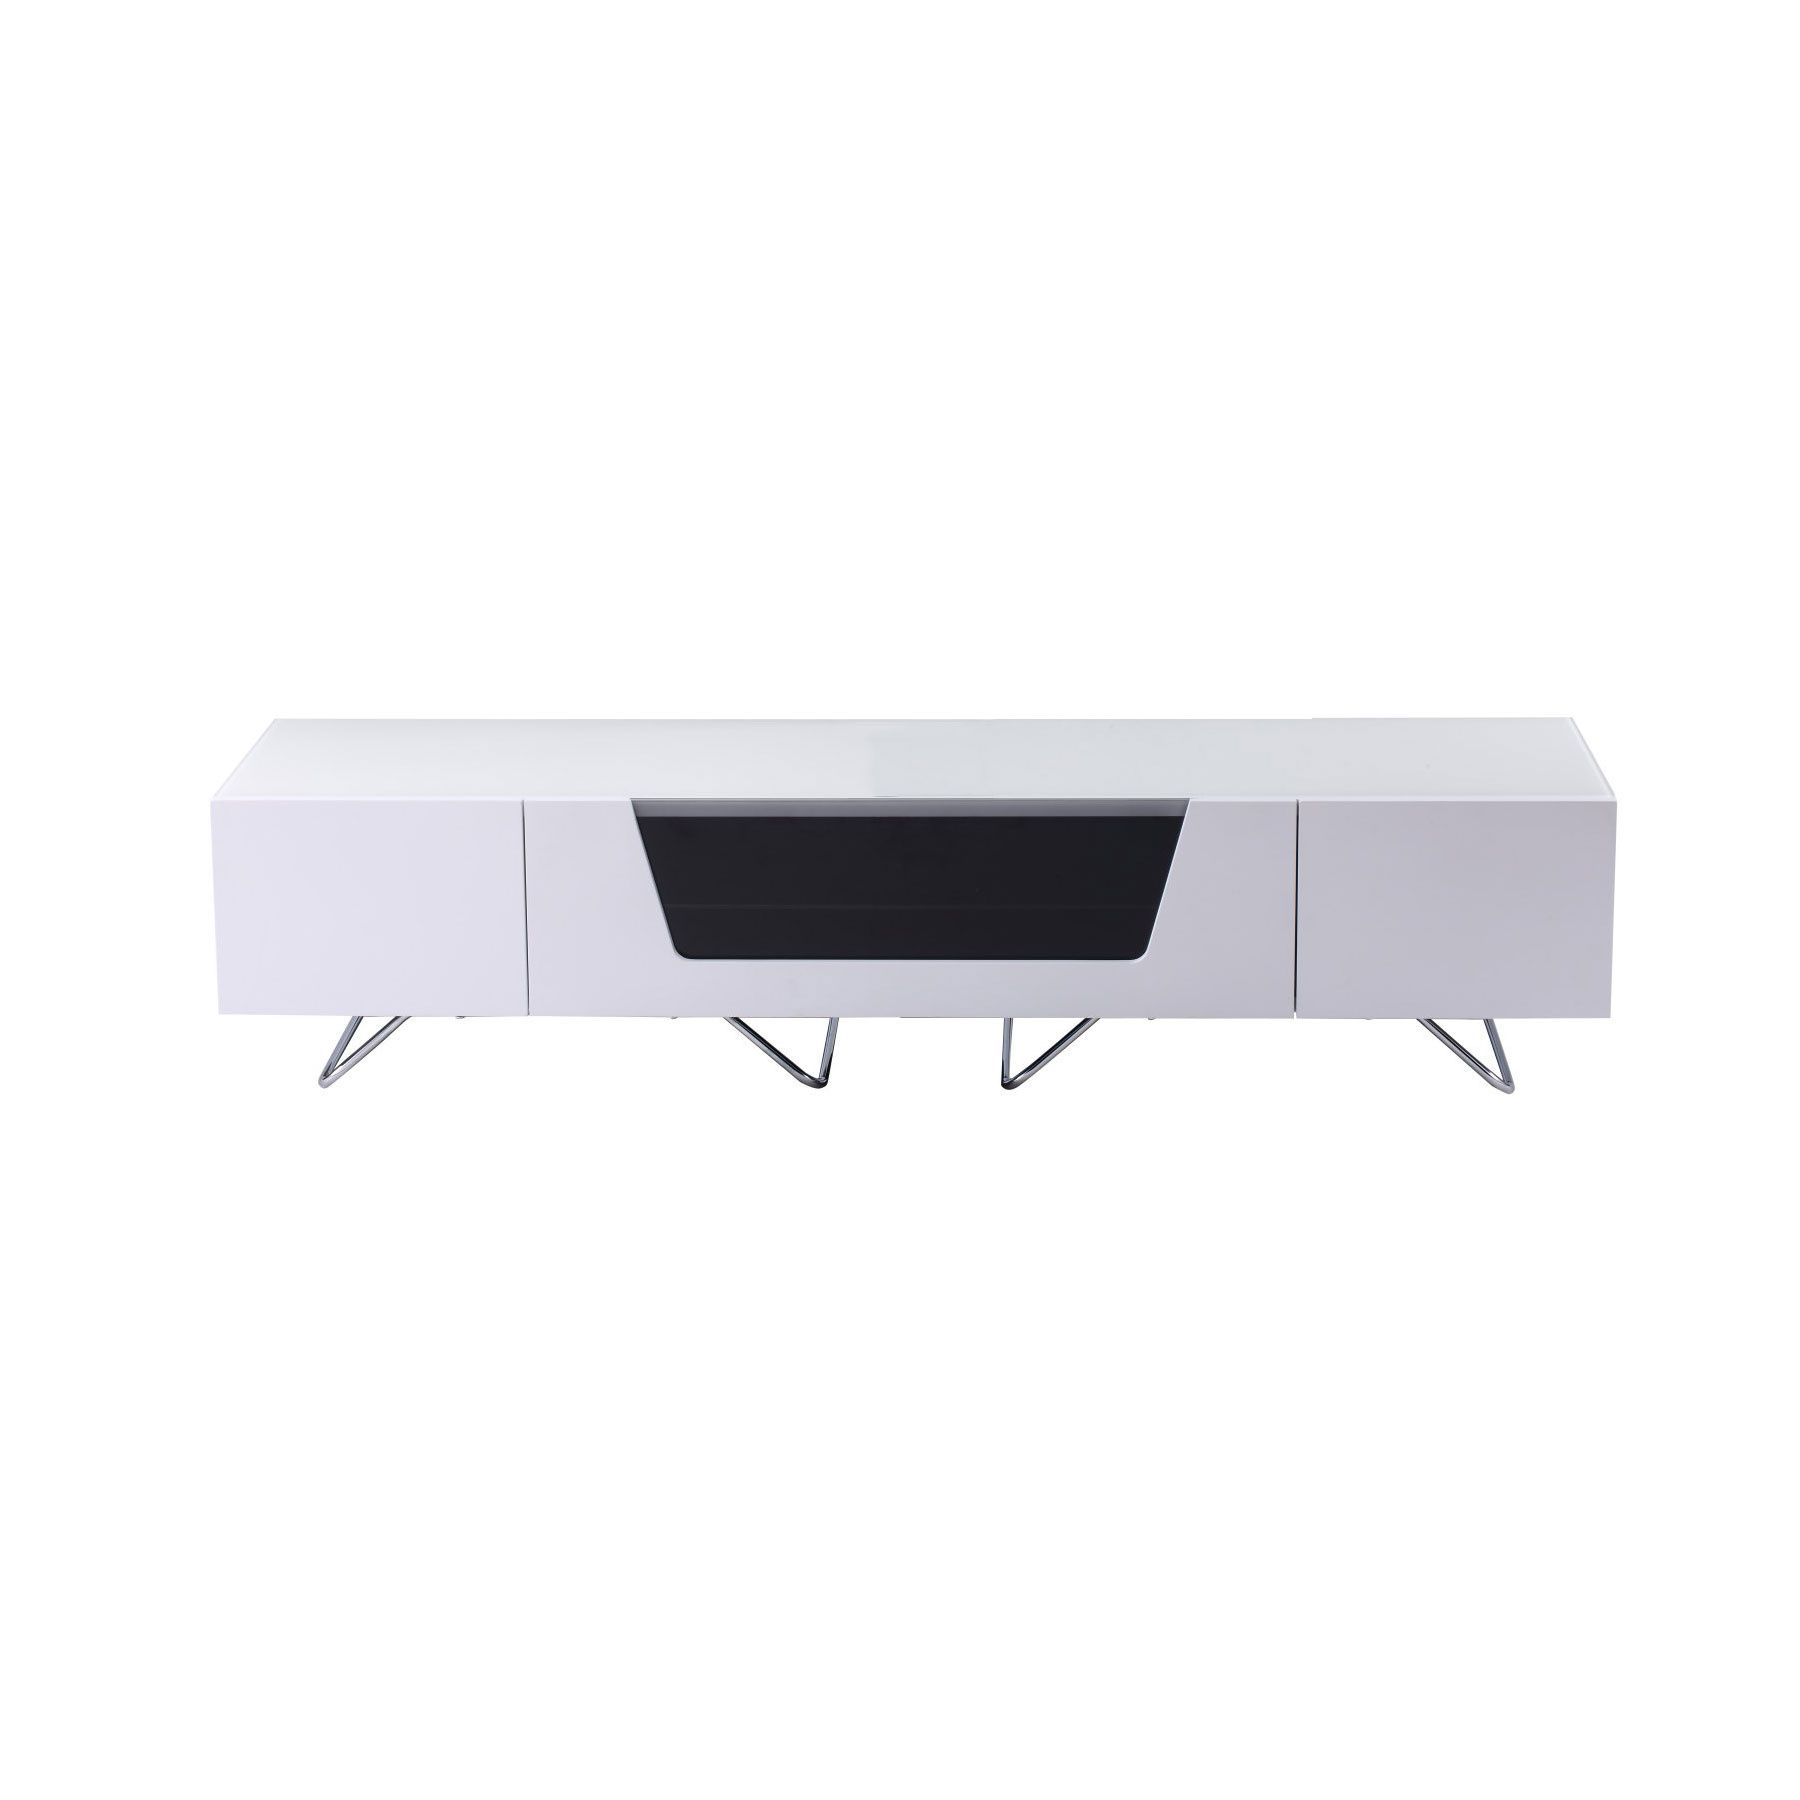 Alphason Chromium 2 160cm White Tv Stand For Up To 75" Tvs Pertaining To Chromium Tv Stands (Photo 7 of 15)